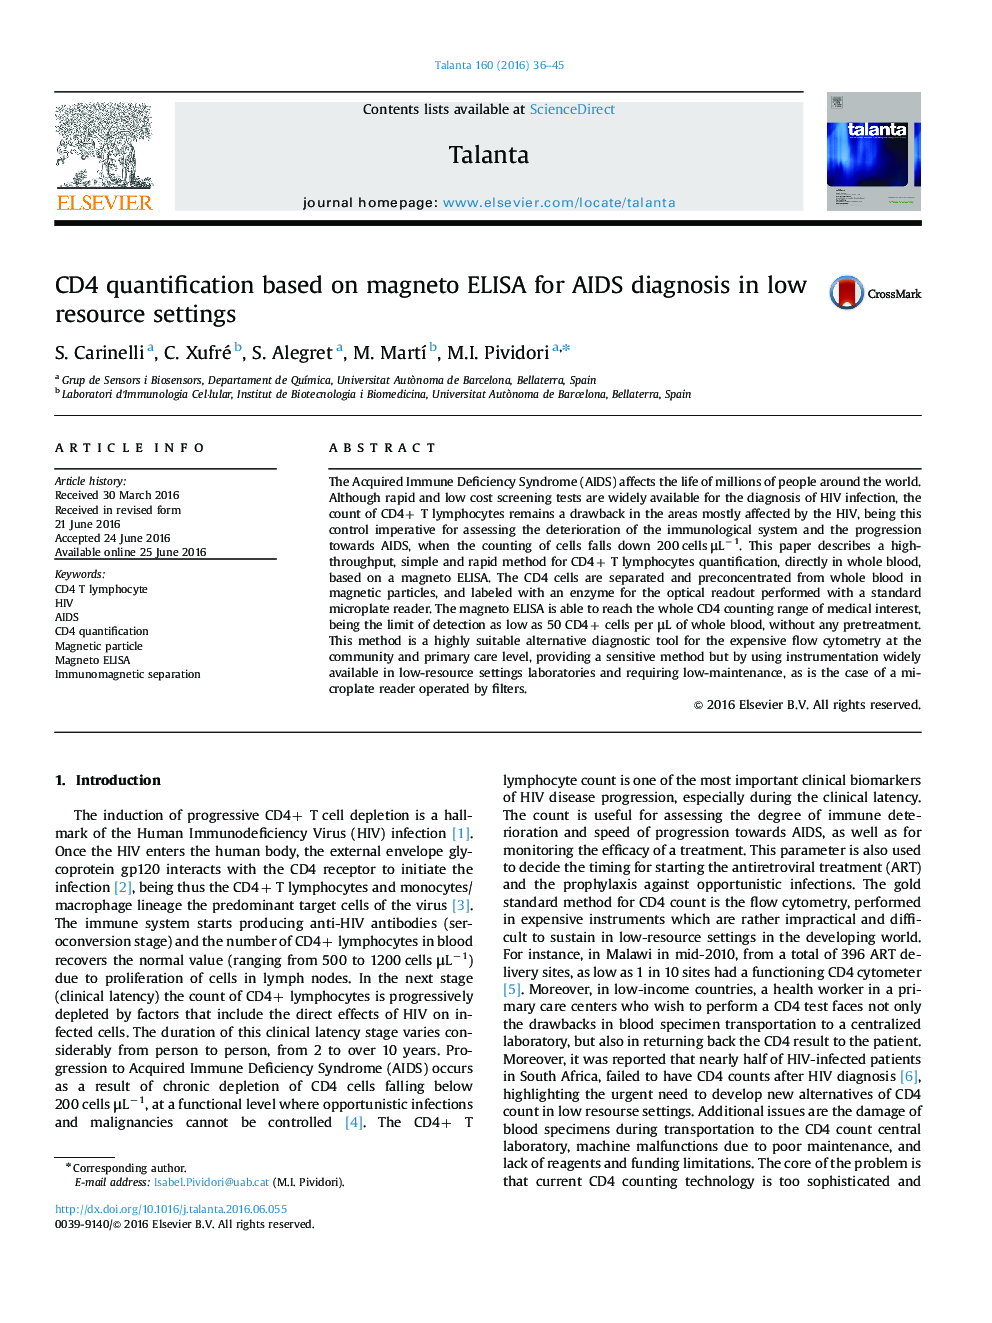 CD4 quantification based on magneto ELISA for AIDS diagnosis in low resource settings